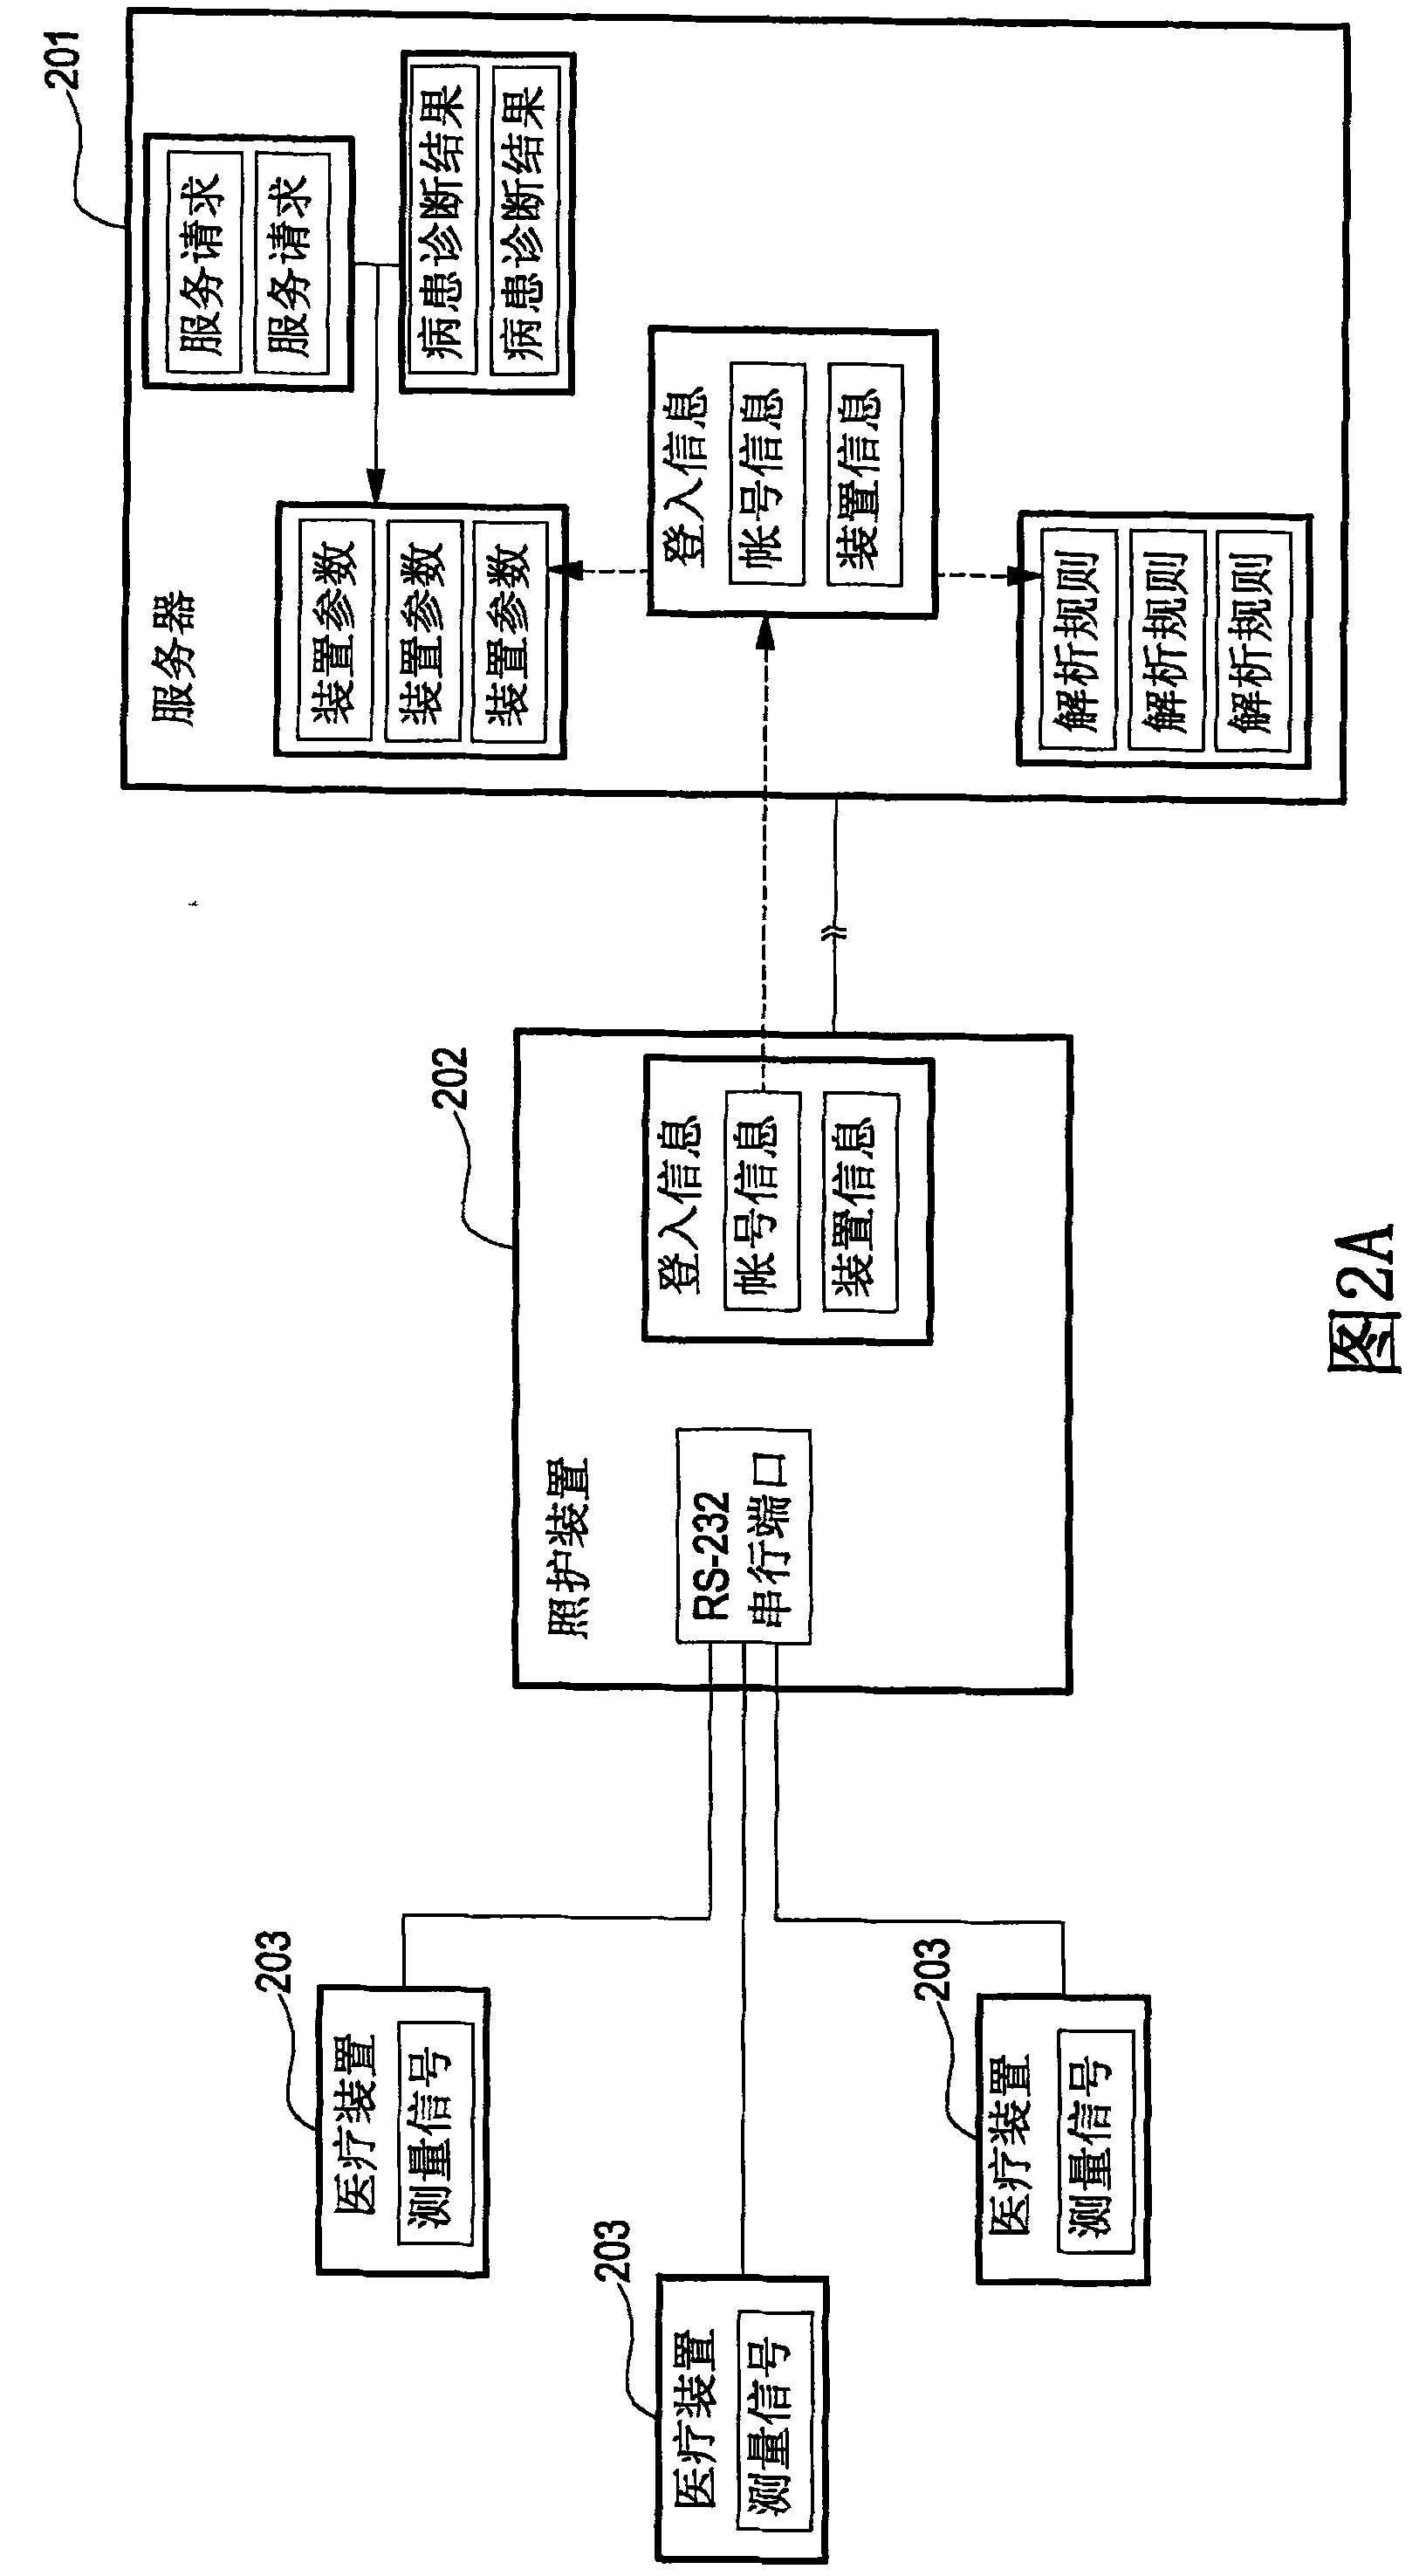 Looking-after system and method for building measurement data thereof